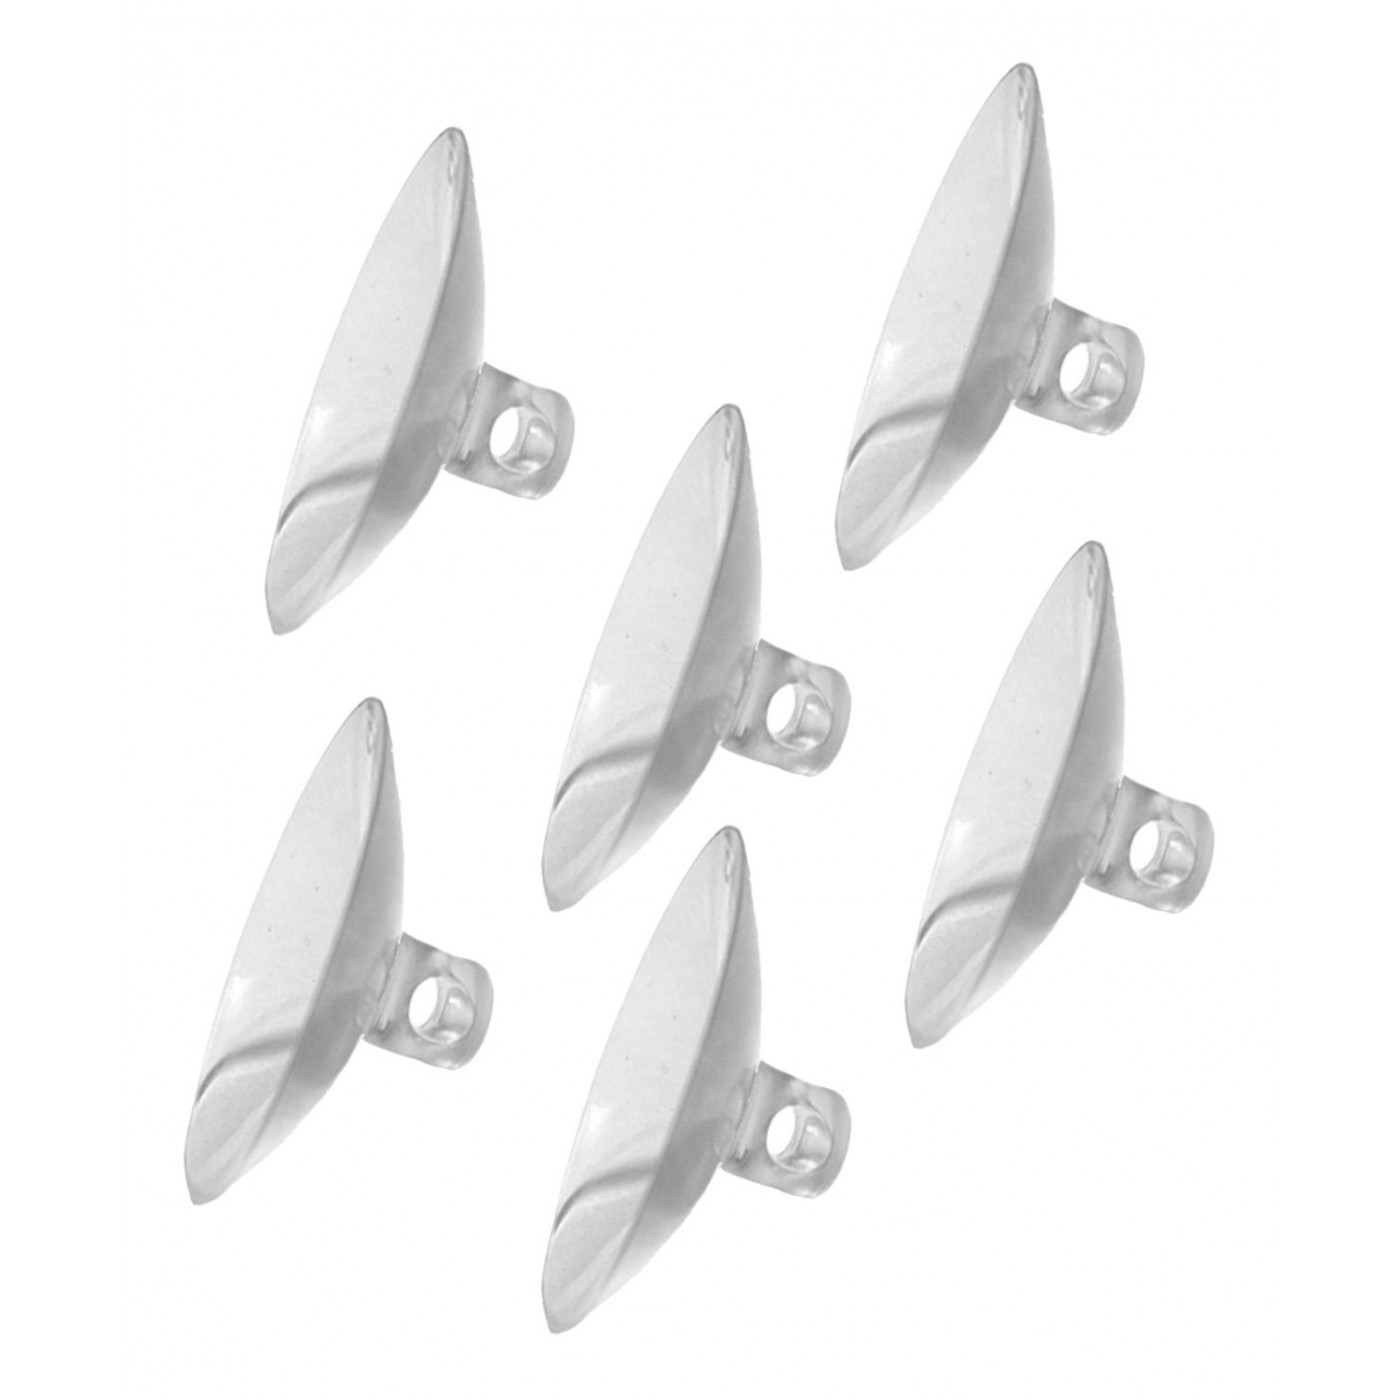 Set of 60 pvc suction cups (25 mm dia, with hole)